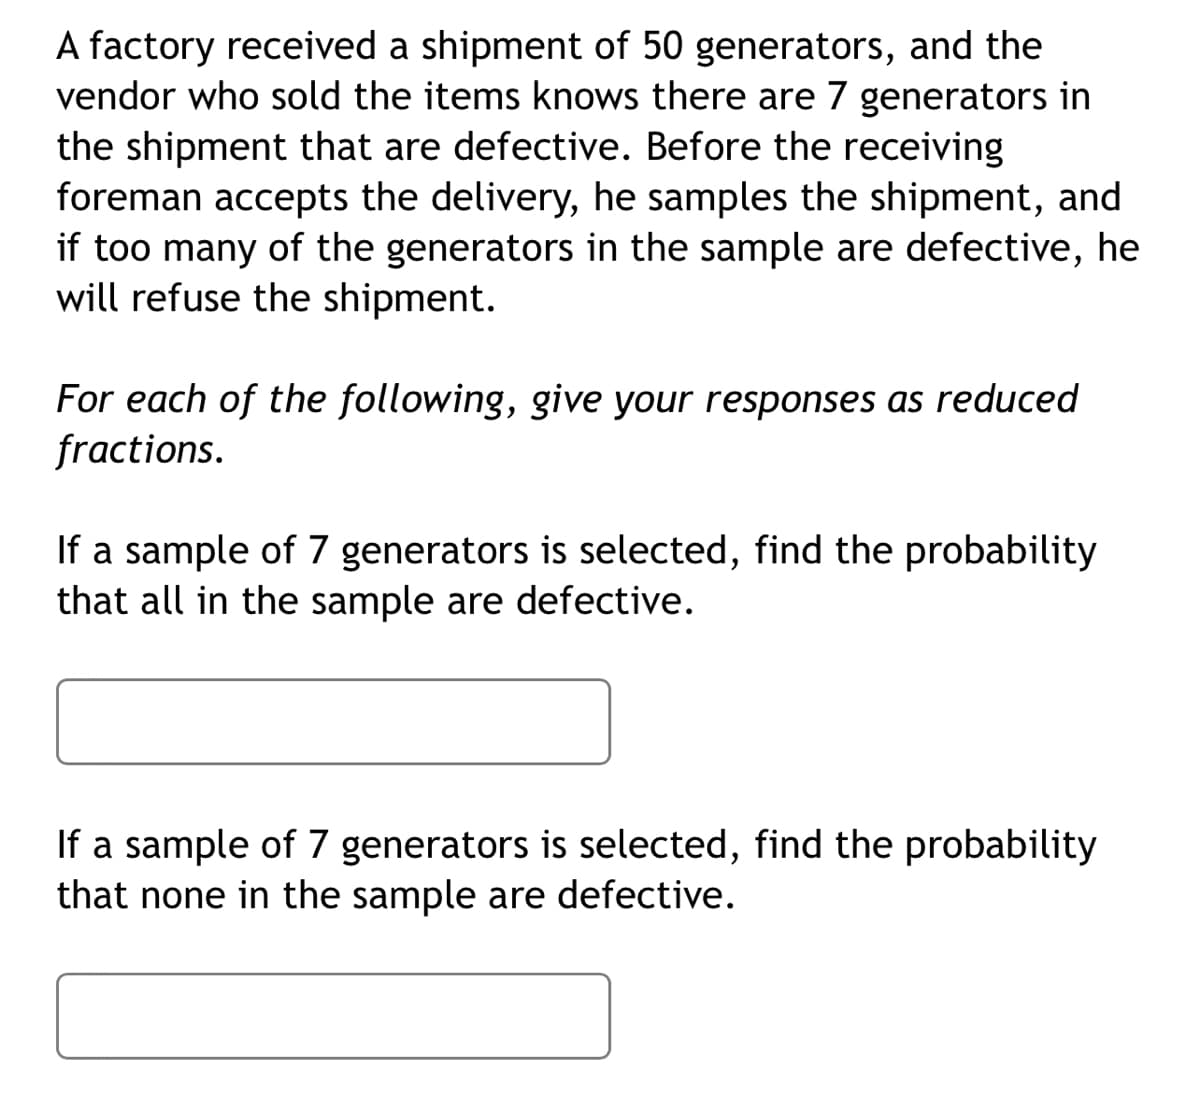 A factory received a shipment of 50 generators, and the
vendor who sold the items knows there are 7 generators in
the shipment that are defective. Before the receiving
foreman accepts the delivery, he samples the shipment, and
if too many of the generators in the sample are defective, he
will refuse the shipment.
For each of the following, give your responses as reduced
fractions.
If a sample of 7 generators is selected, find the probability
that all in the sample are defective.
If a sample of 7 generators is selected, find the probability
that none in the sample are defective.